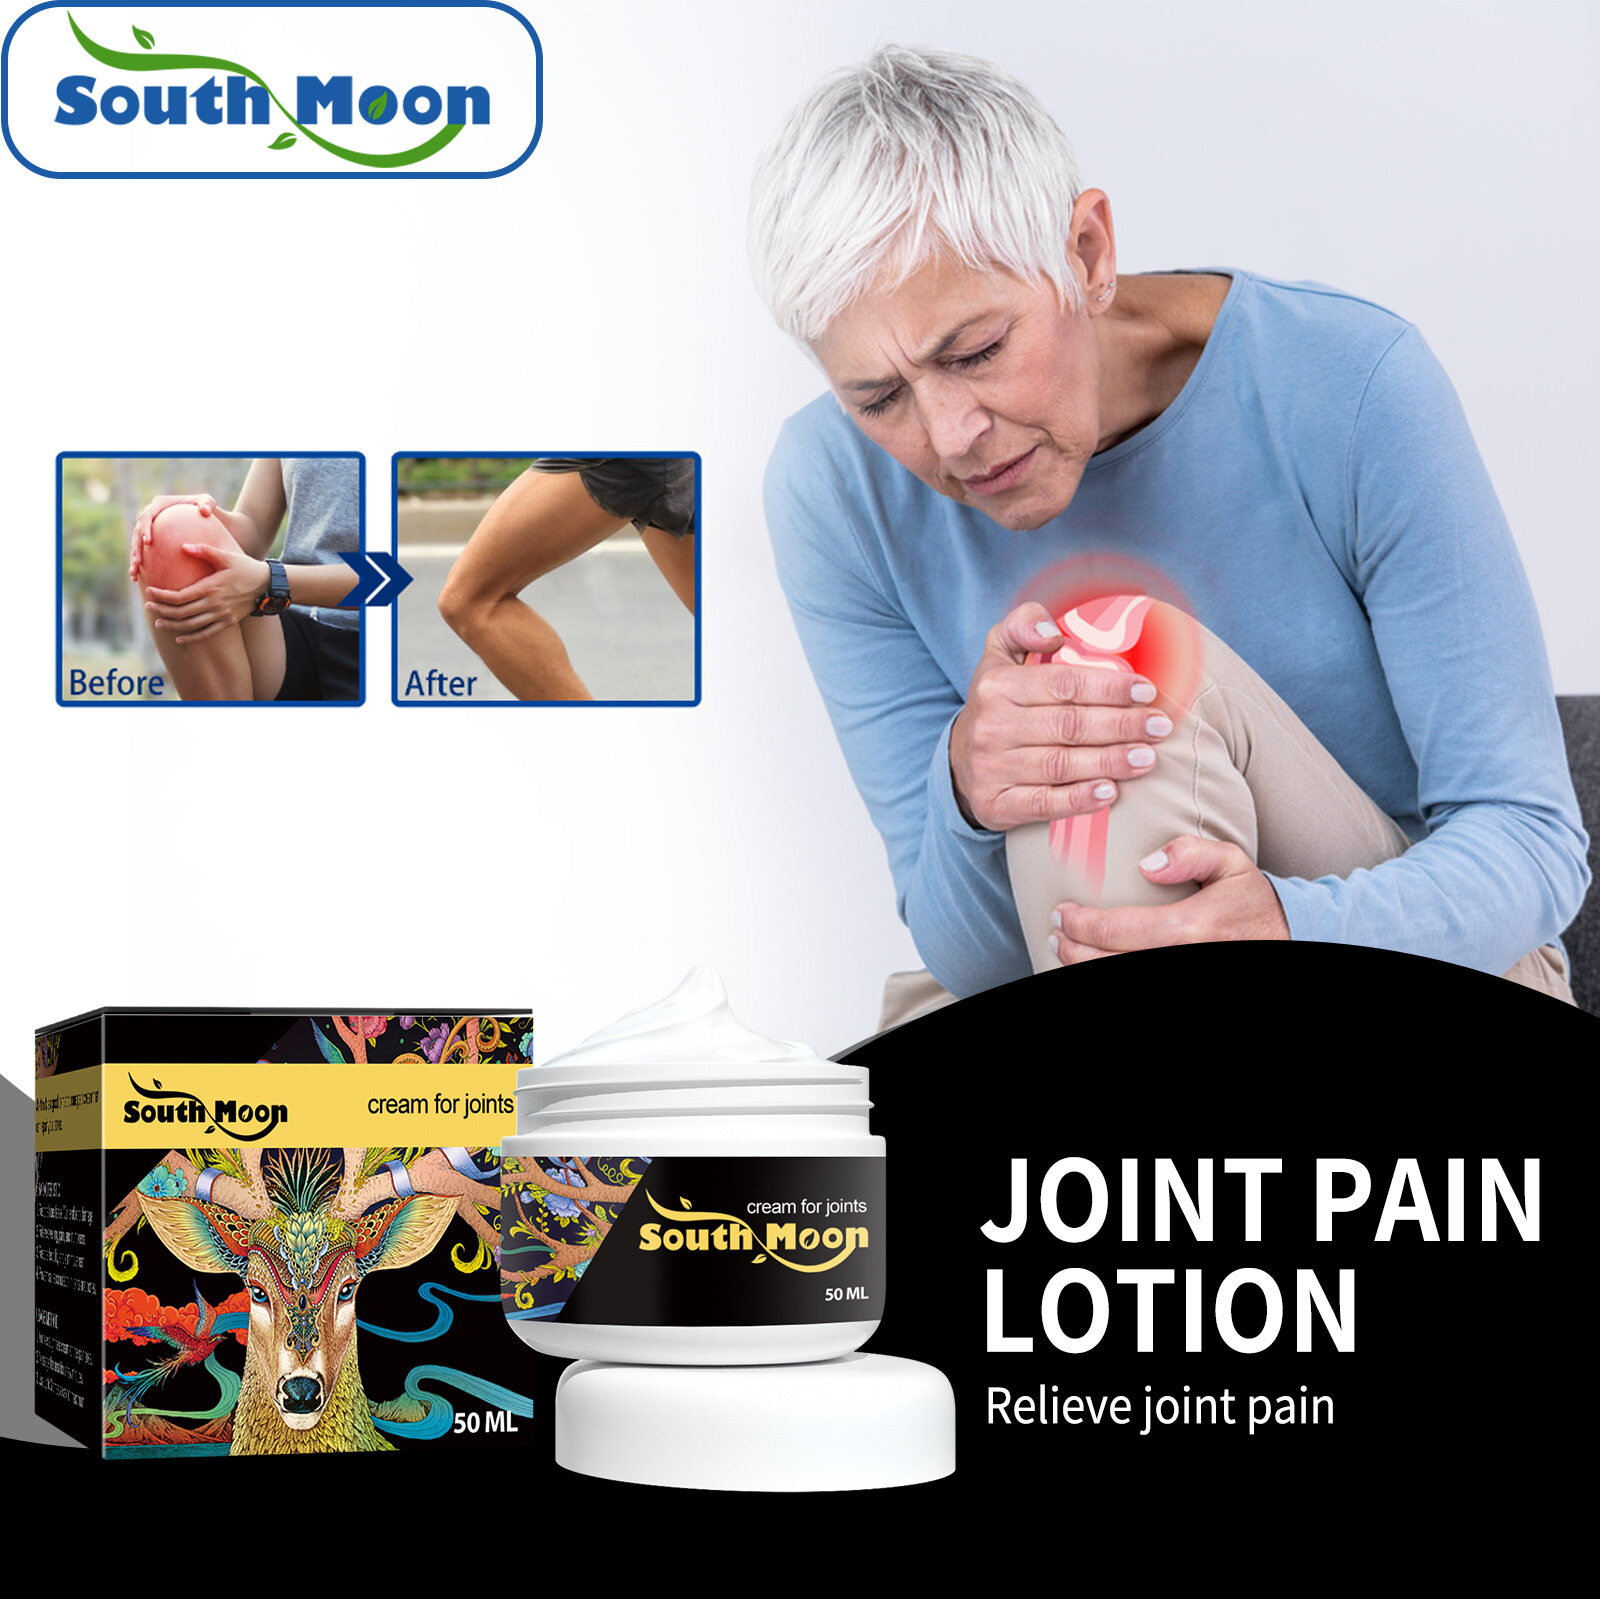 South Moon Joint Pain Relief Cream Relief Lumbar Disc Herniation Knee